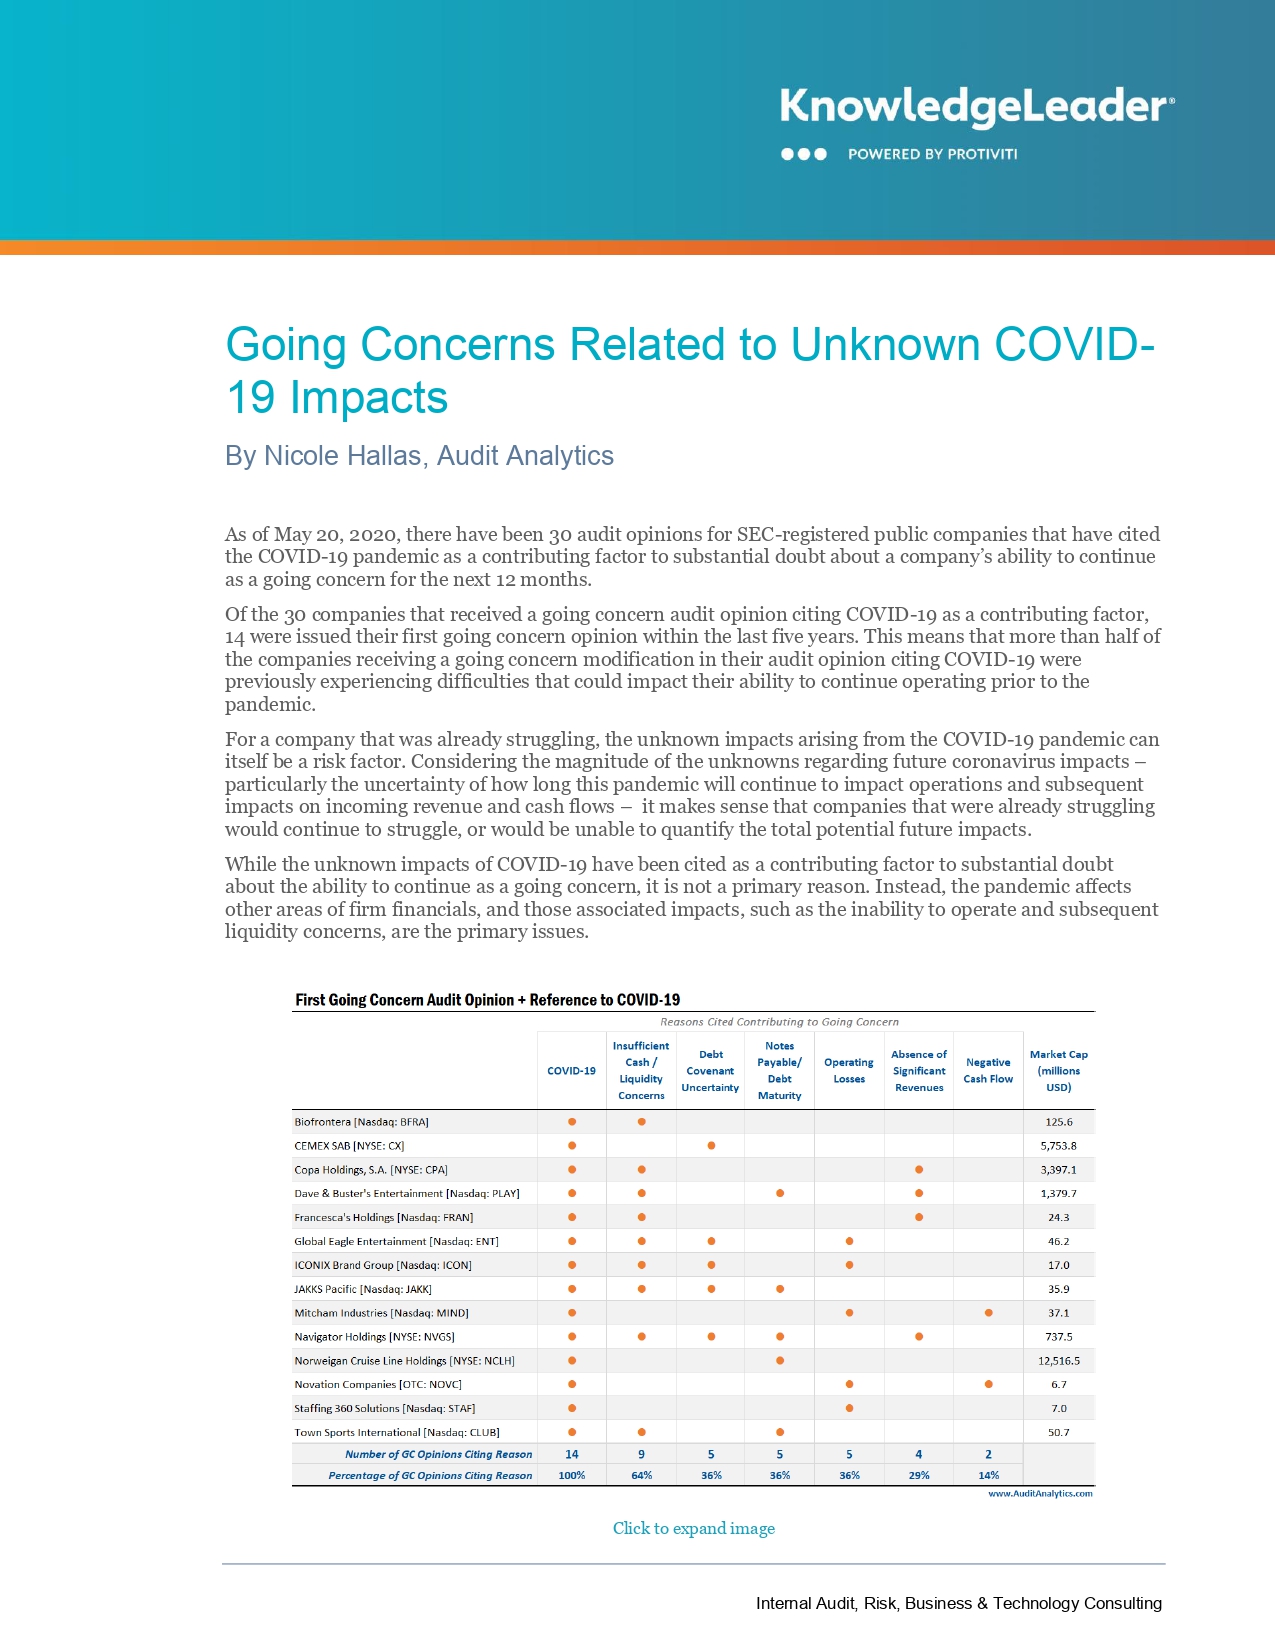 Going Concerns Related to Unknown COVID-19 Impacts